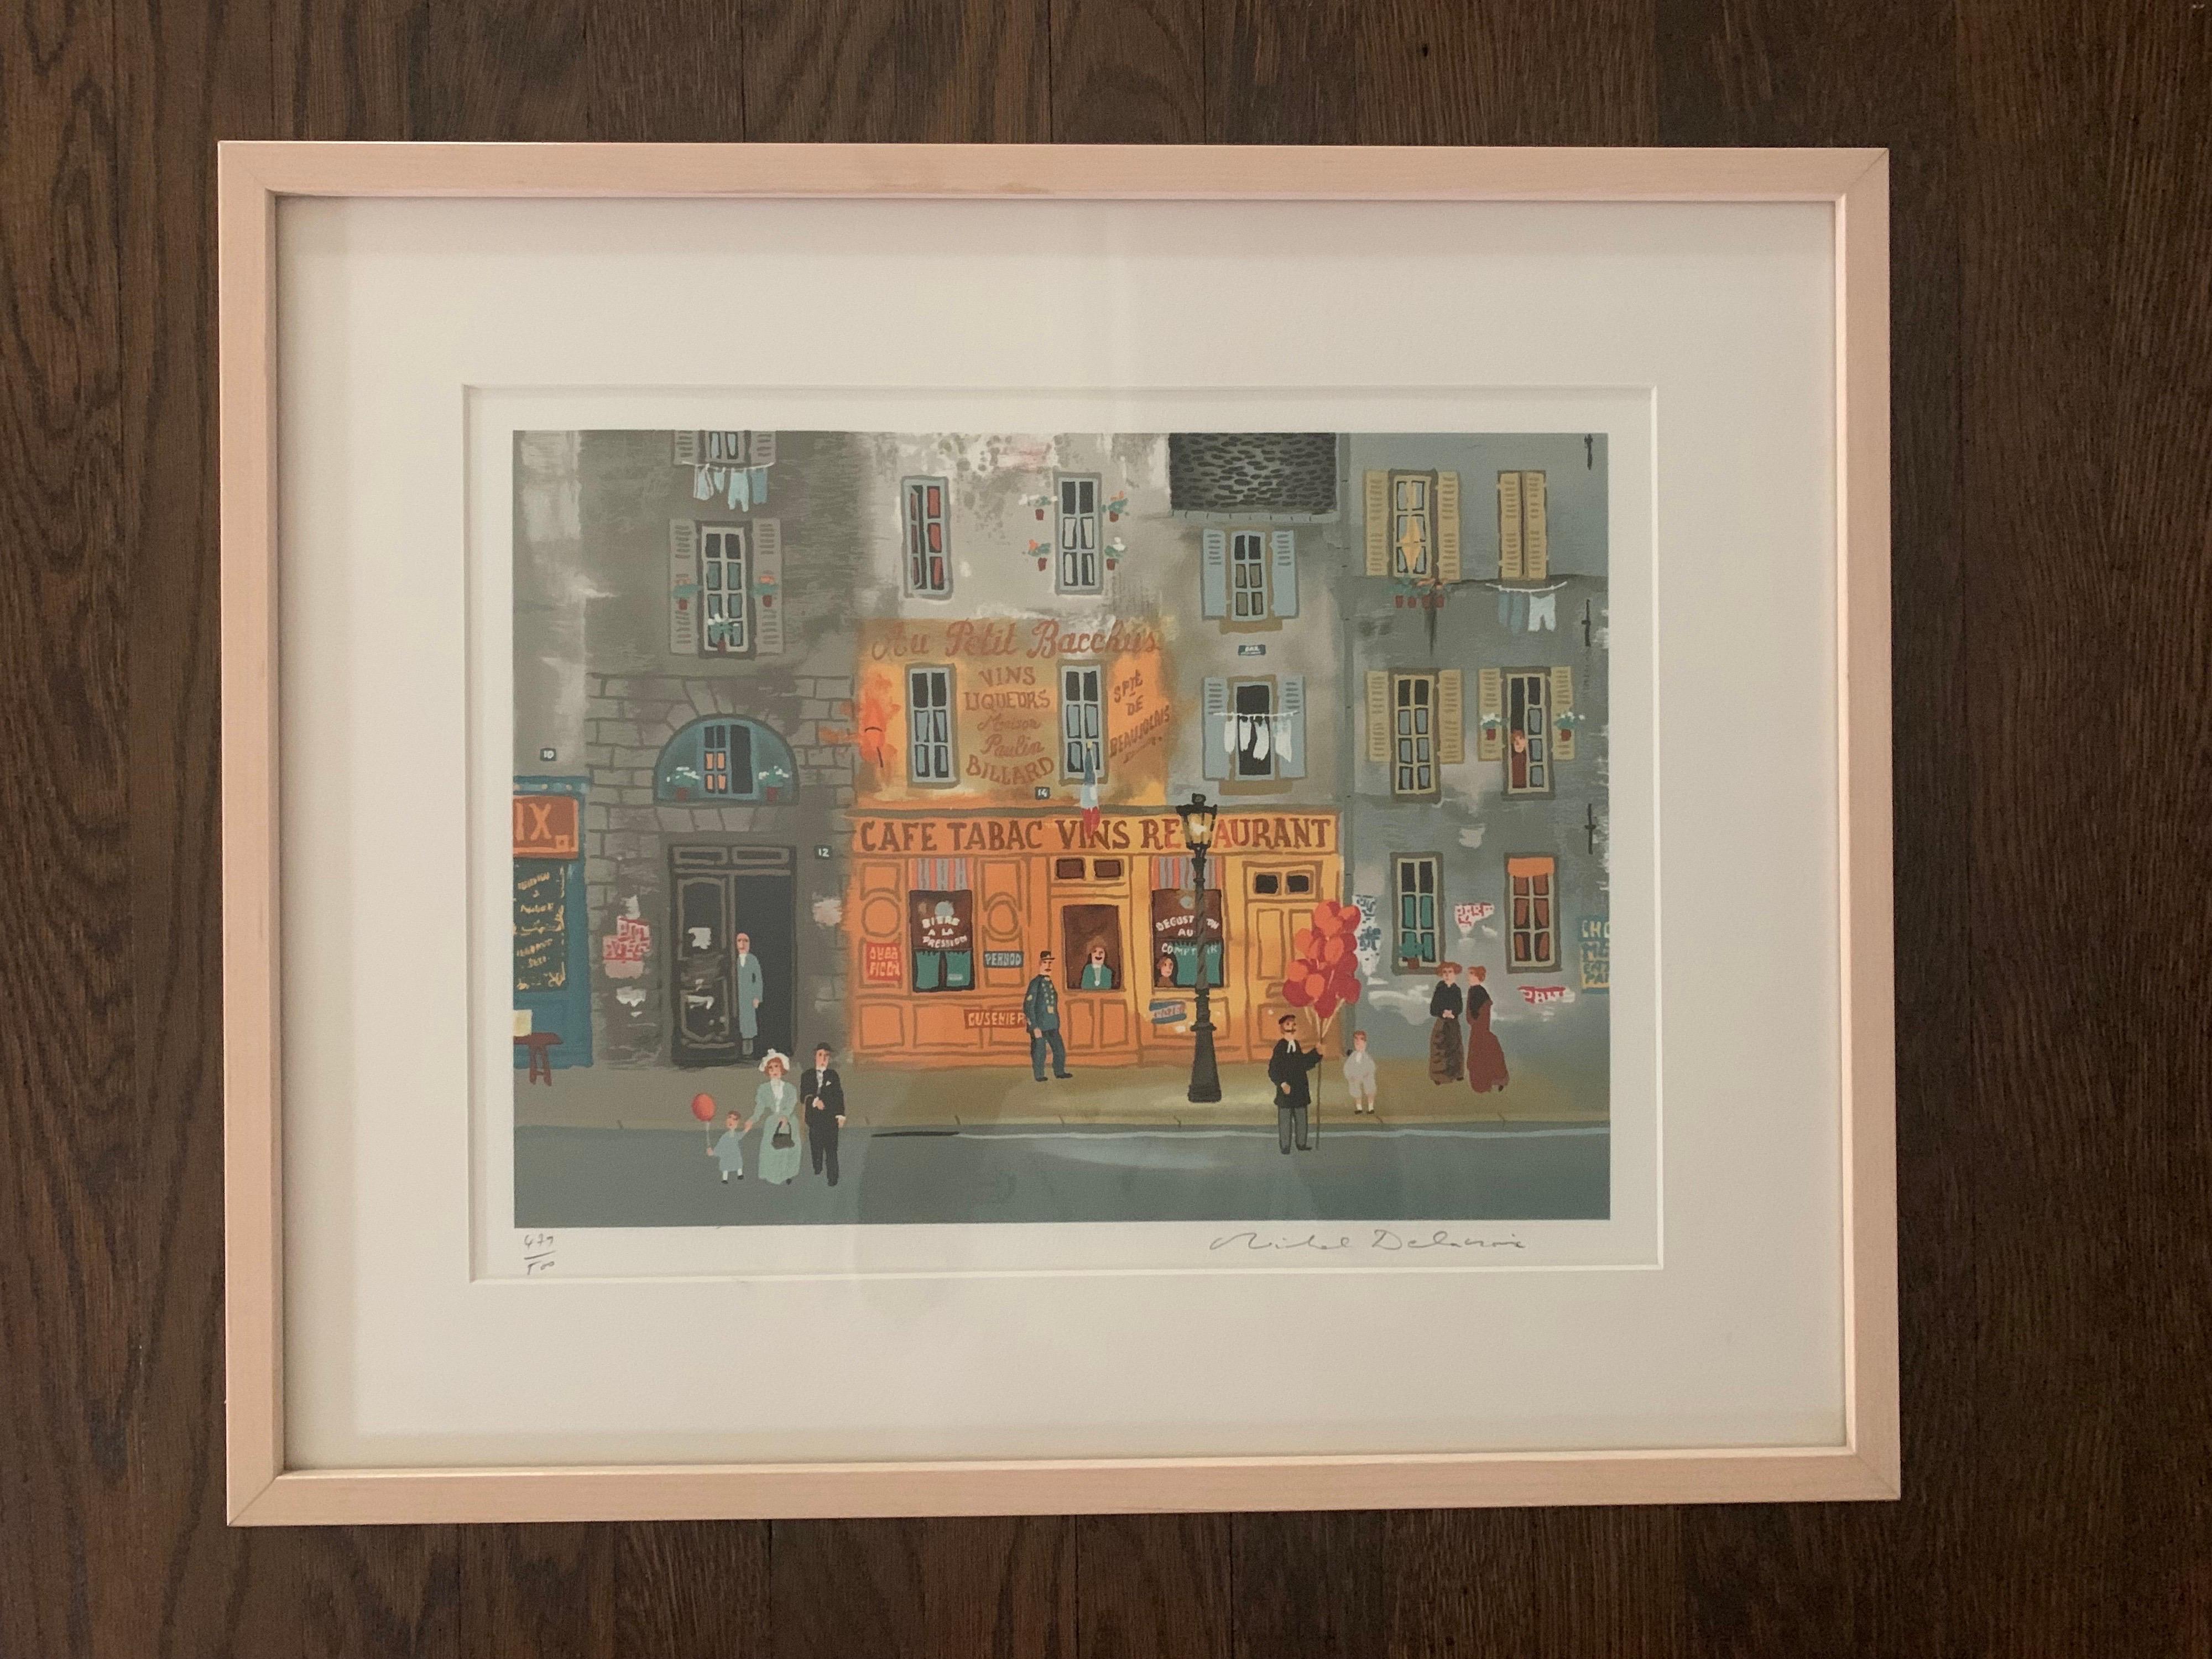 One of three limited edition signed in pencil lithographs by Michel Delacroix that we are selling exclusively on 1stDibs this week.

MICHEL DELACROIX (1933- ) Internationally renowned French painter Michel Delacroix is an acclaimed master of the